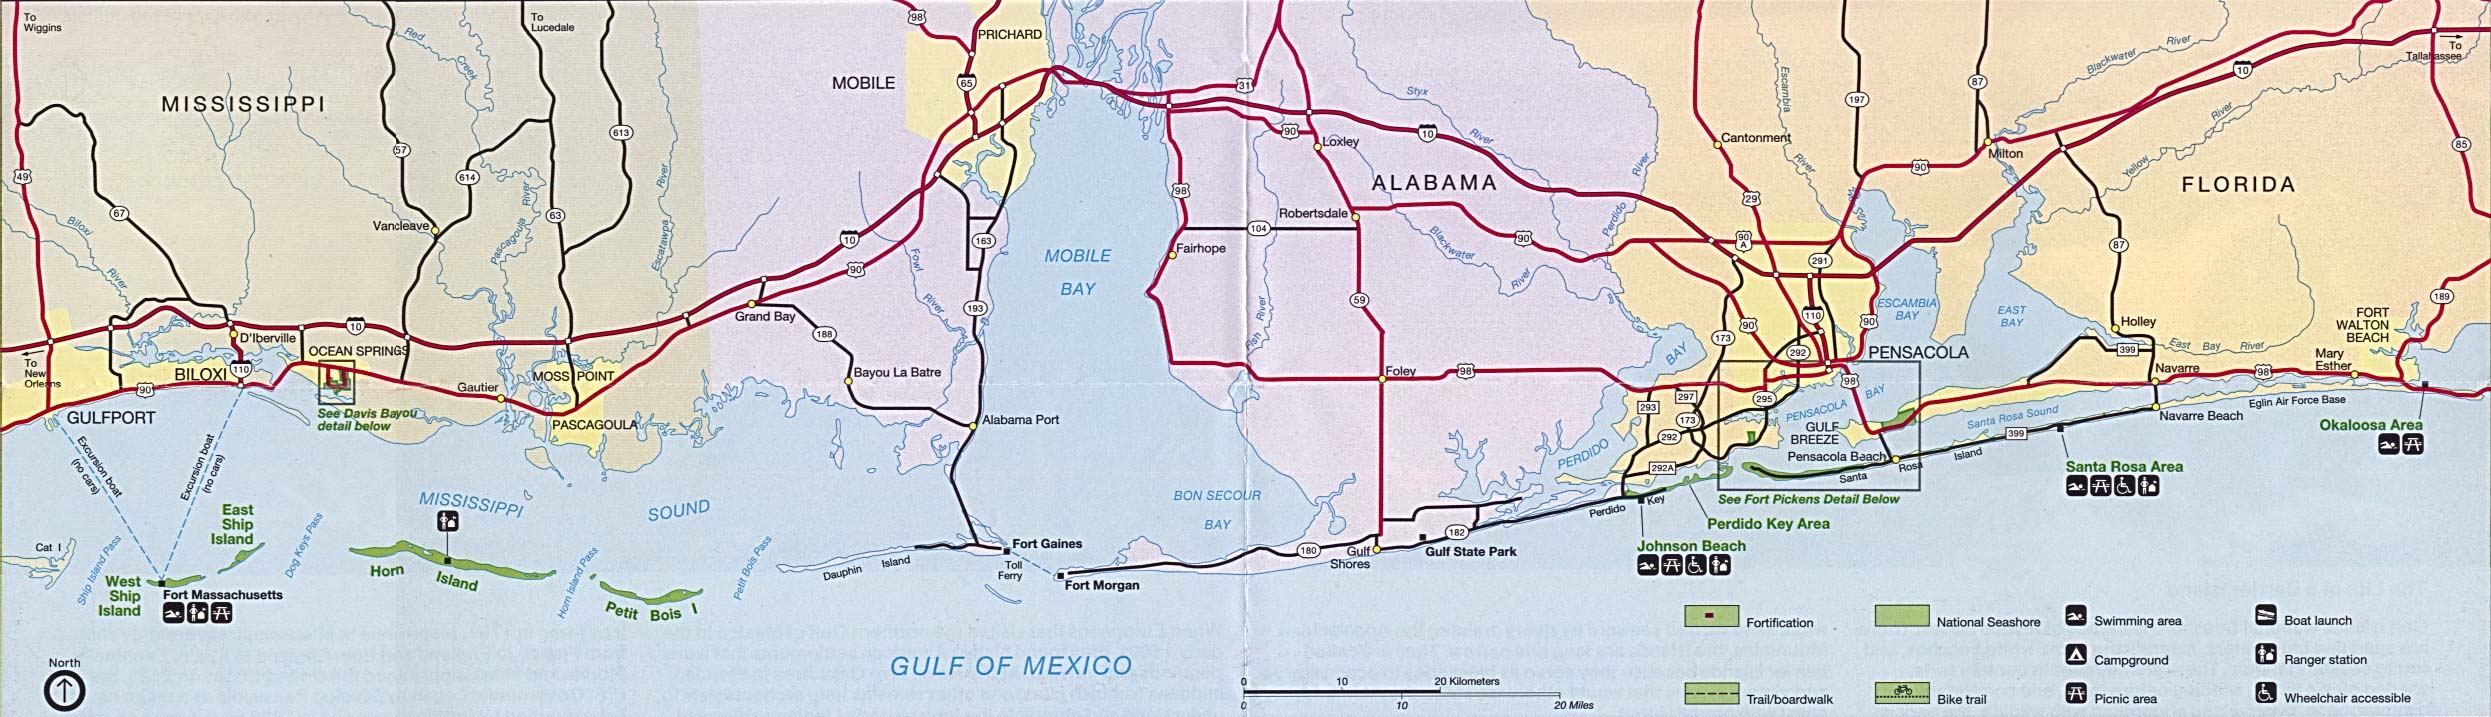  Maps of United States National Parks, Monuments and Historic Sites Gulf of Mexico [Mississippi / Alabama / Florida] (Area Features) 1994 (351K) 